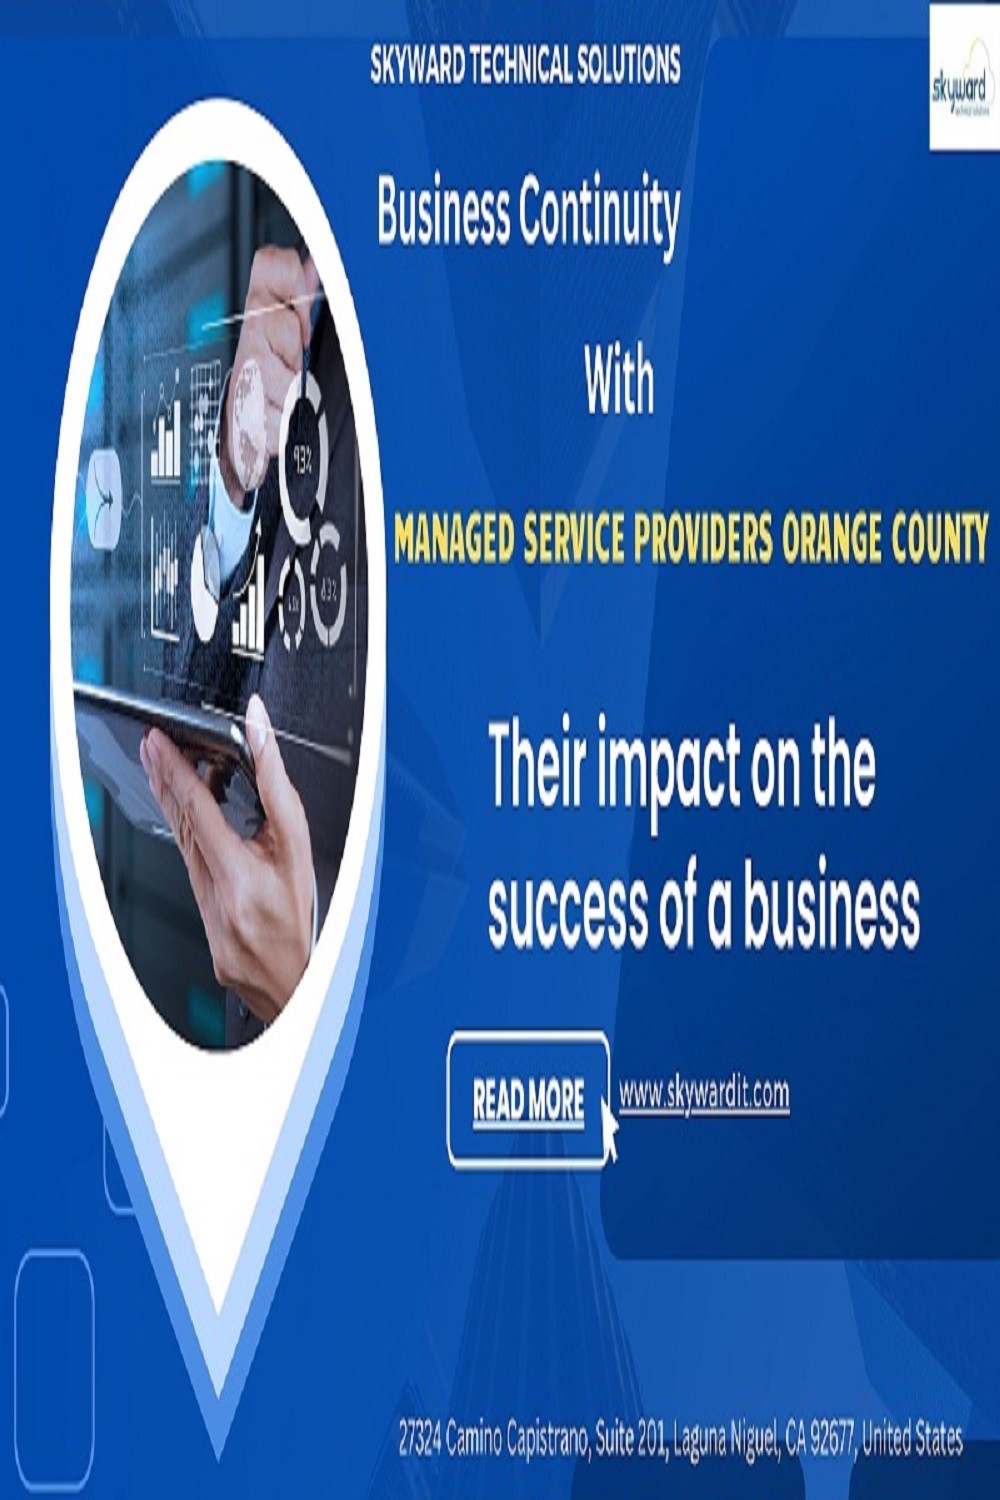 Ensuring Business Continuity With Managed Service Providers In Orange County